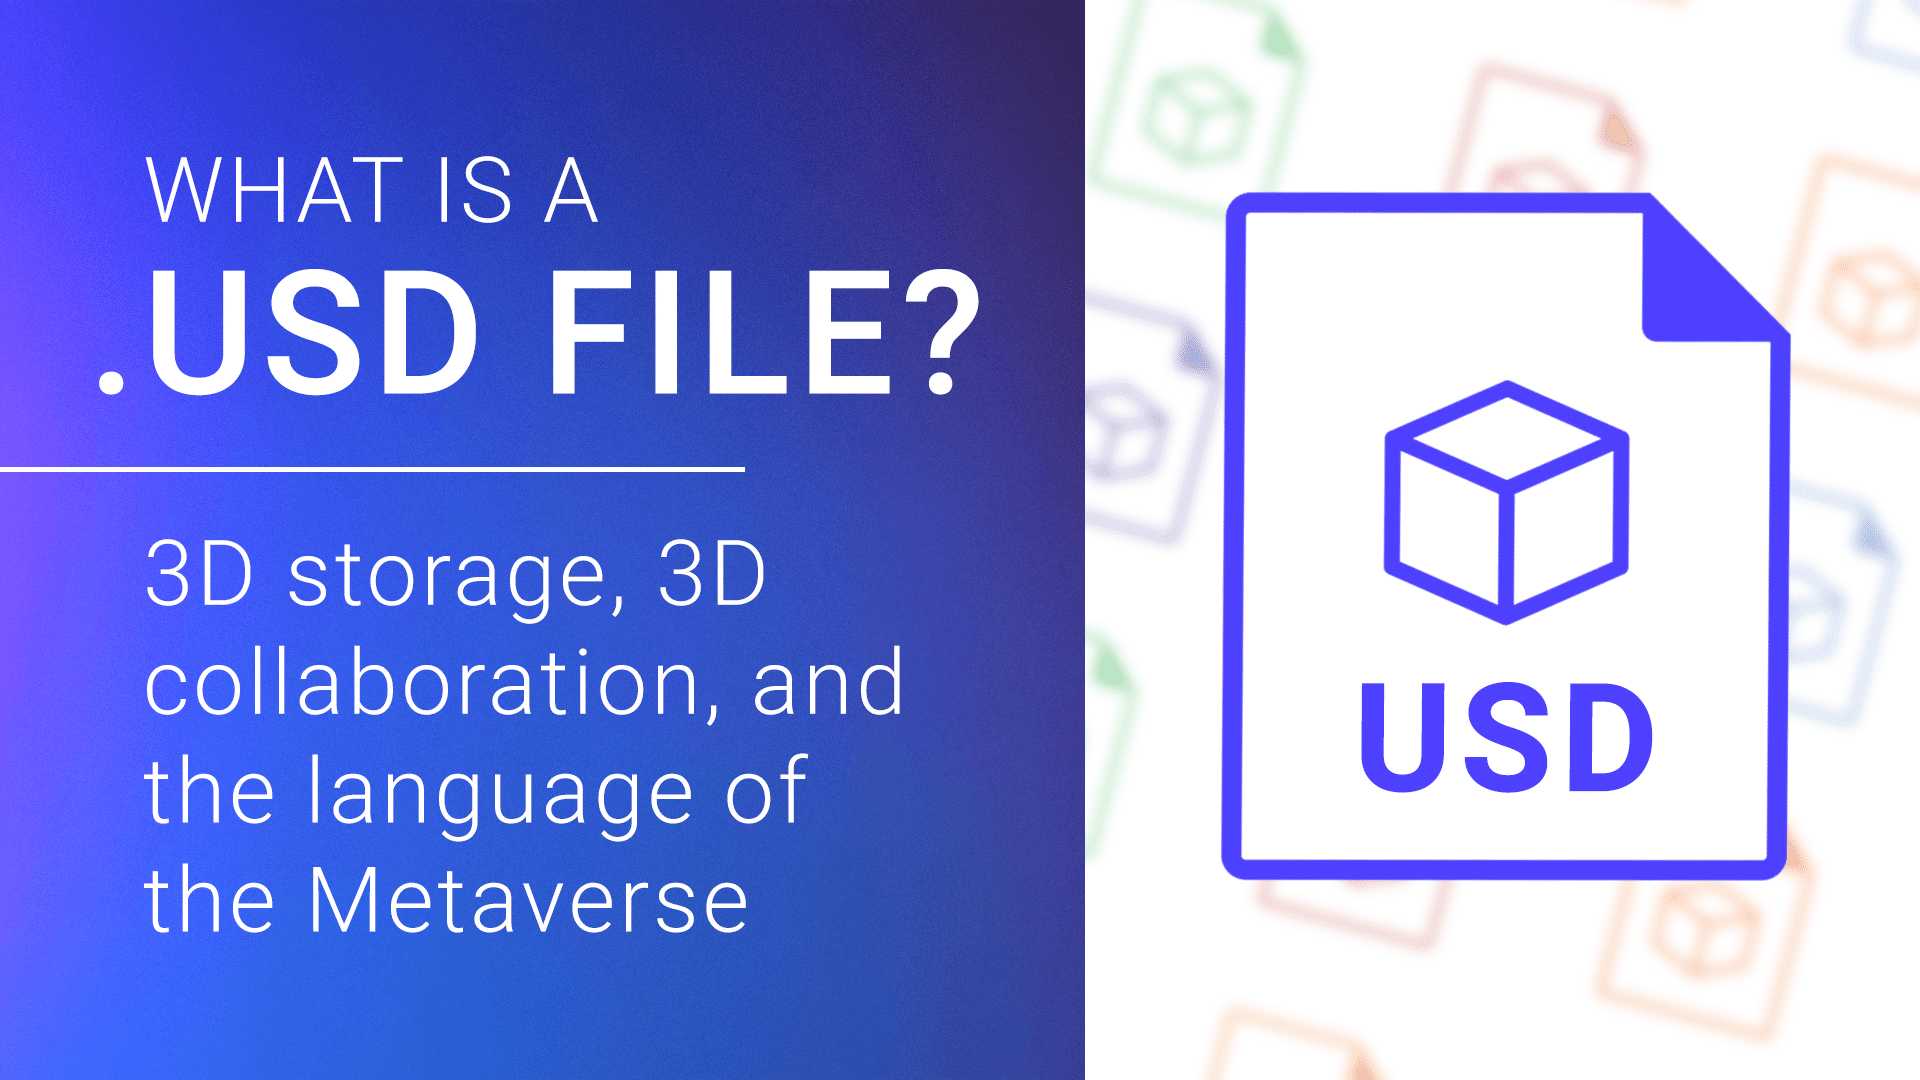 USD File Overview